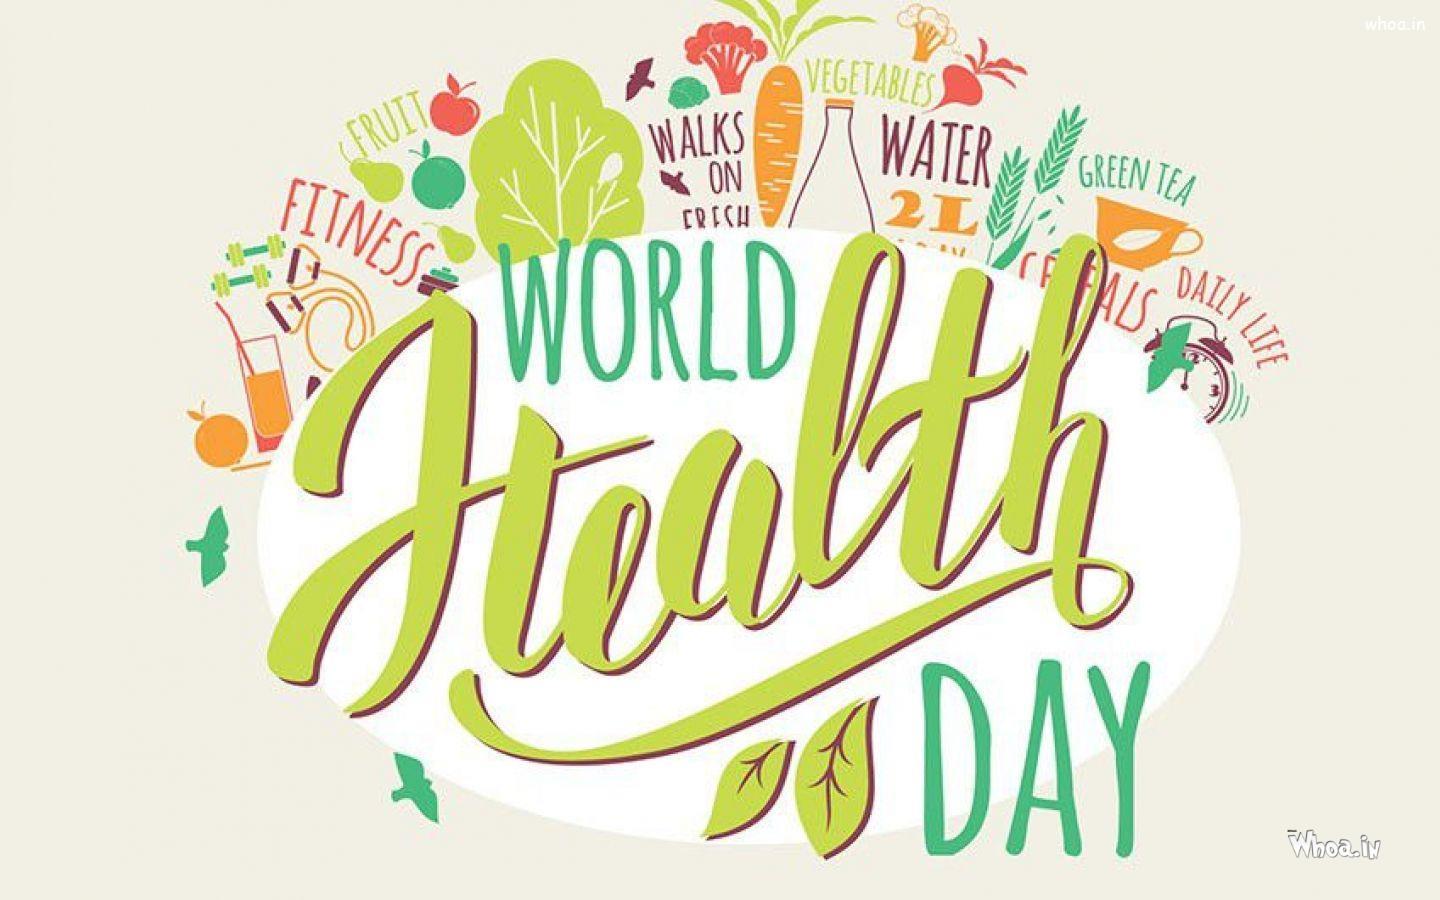 World Health Day Wallpapers & Hd Images World Health Day #5 World-Health-Day  Wallpaper